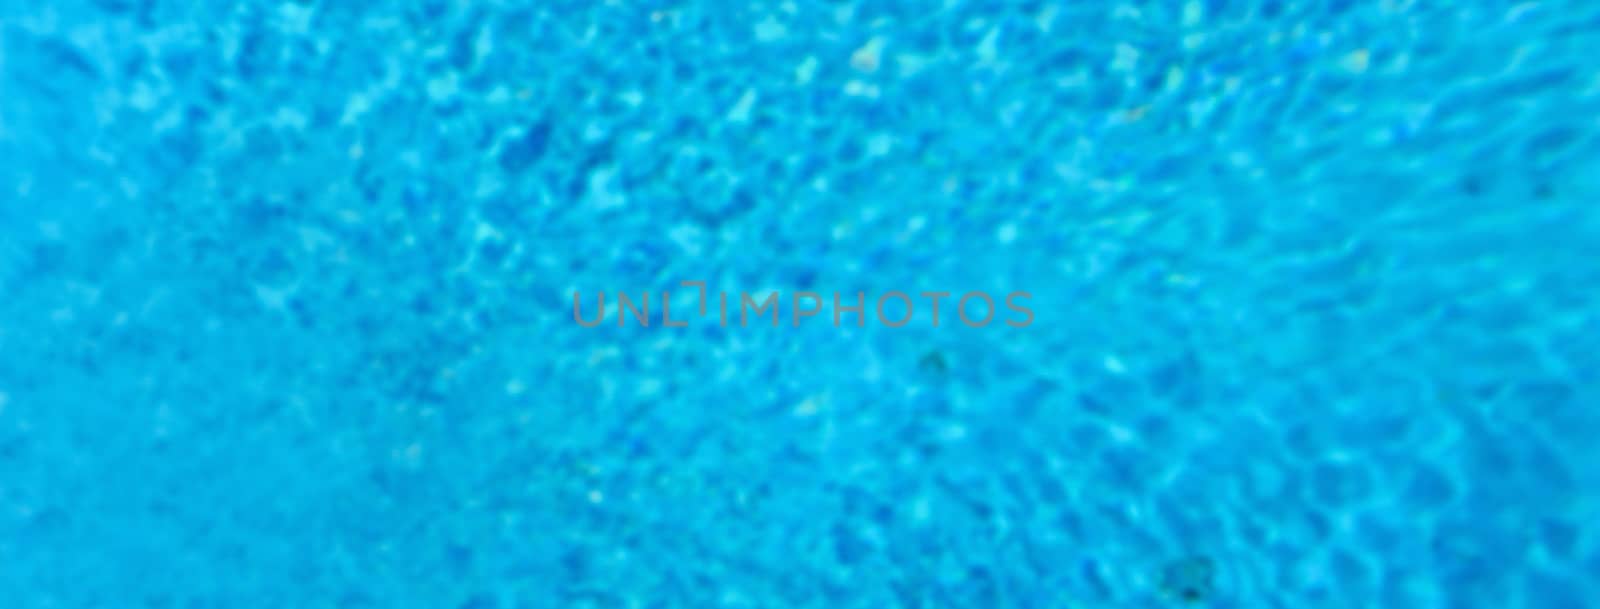 Defocused background with blue water surface of a swimming pool. Intentionally blurred post production for bokeh effect